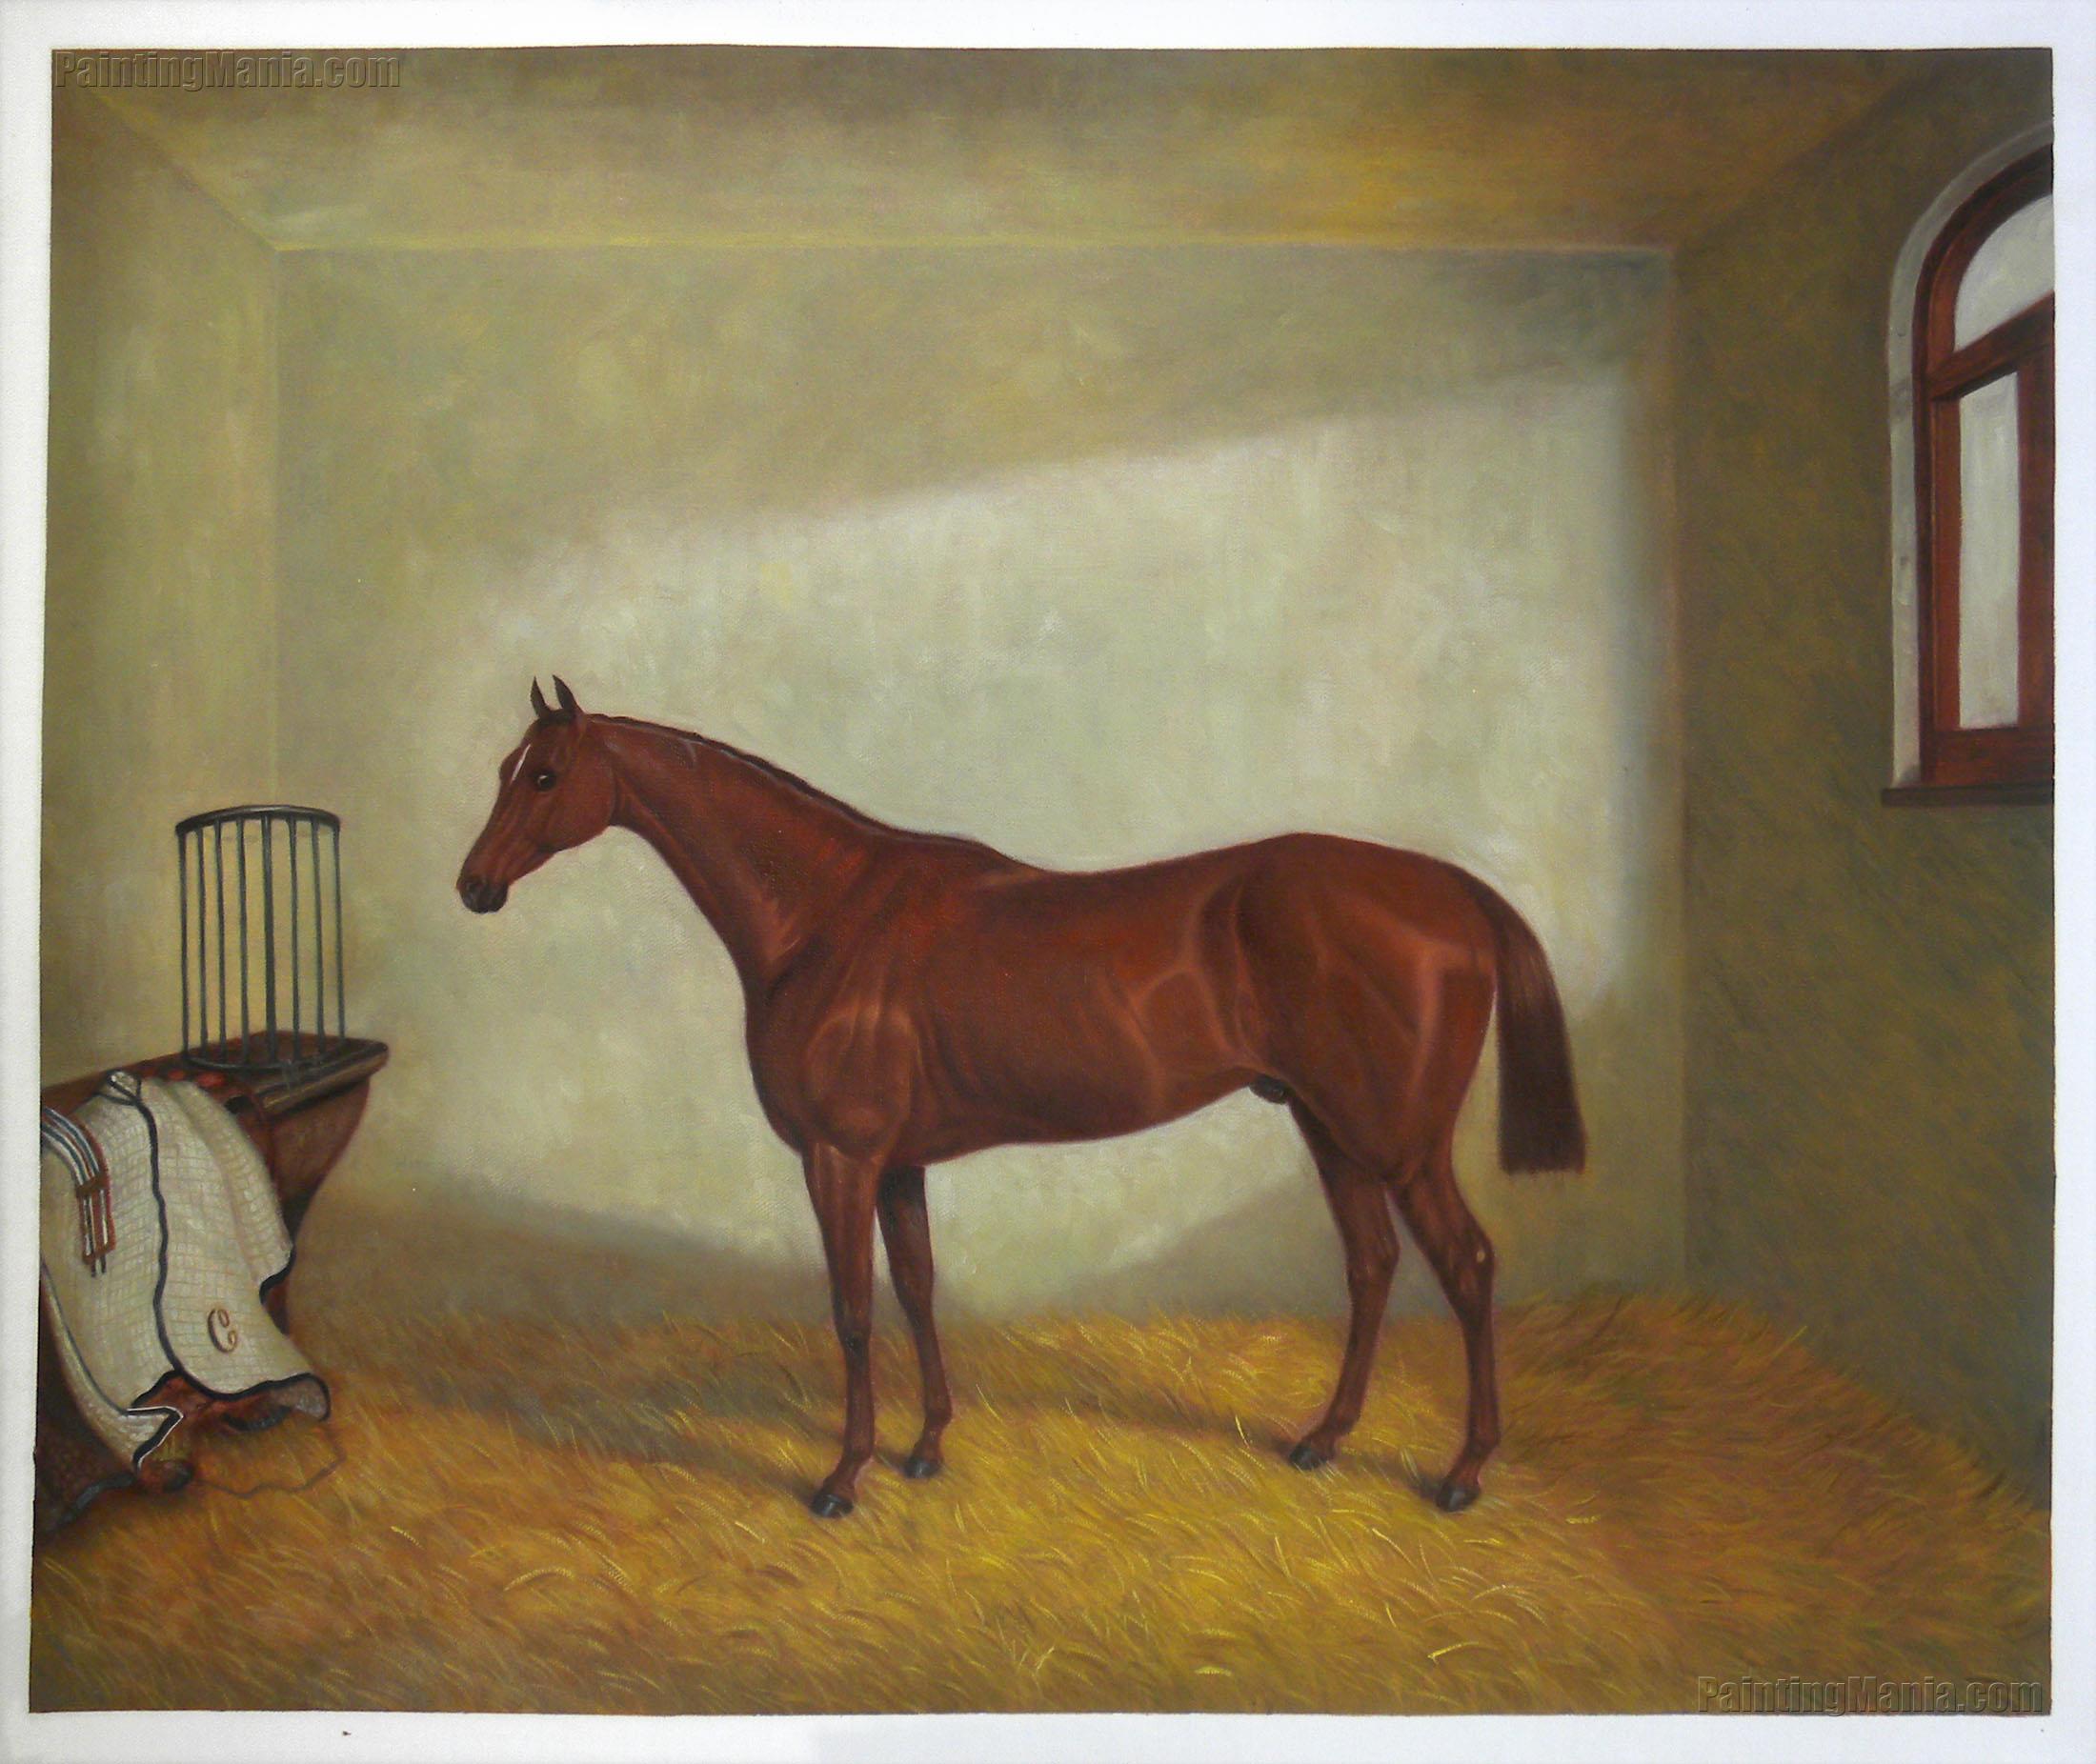 "Hermit", Winner of the 1867 Derby, in a Stable